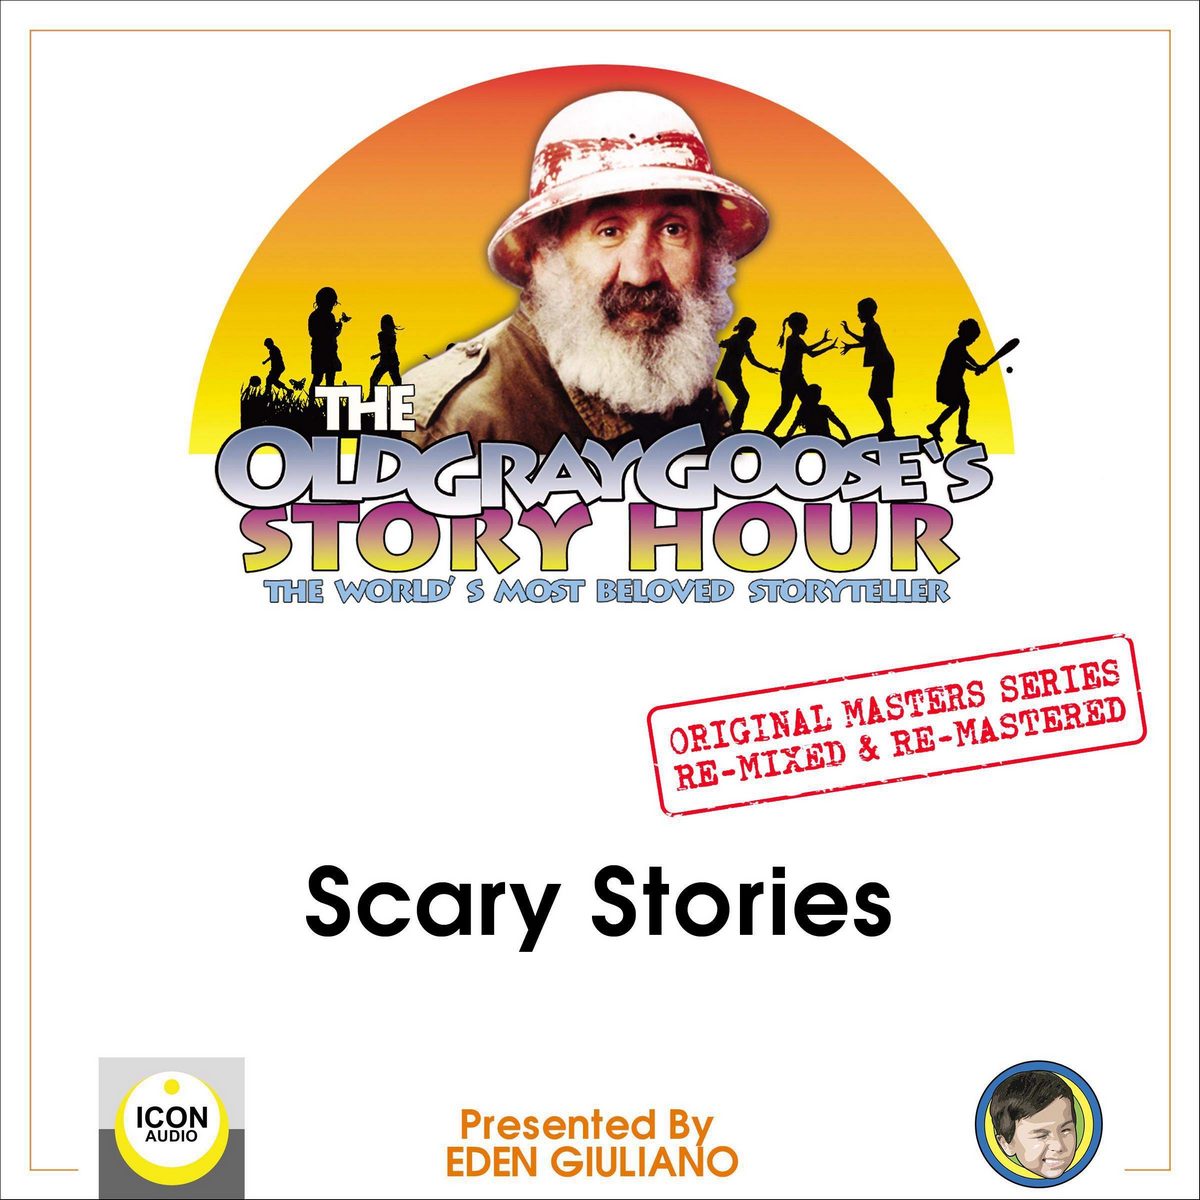 The Old Gray Goose’s Story Hour; The World’s Most Beloved Storyteller; Original Masters Series Re-mixed and Re-mastered; Scary Stories